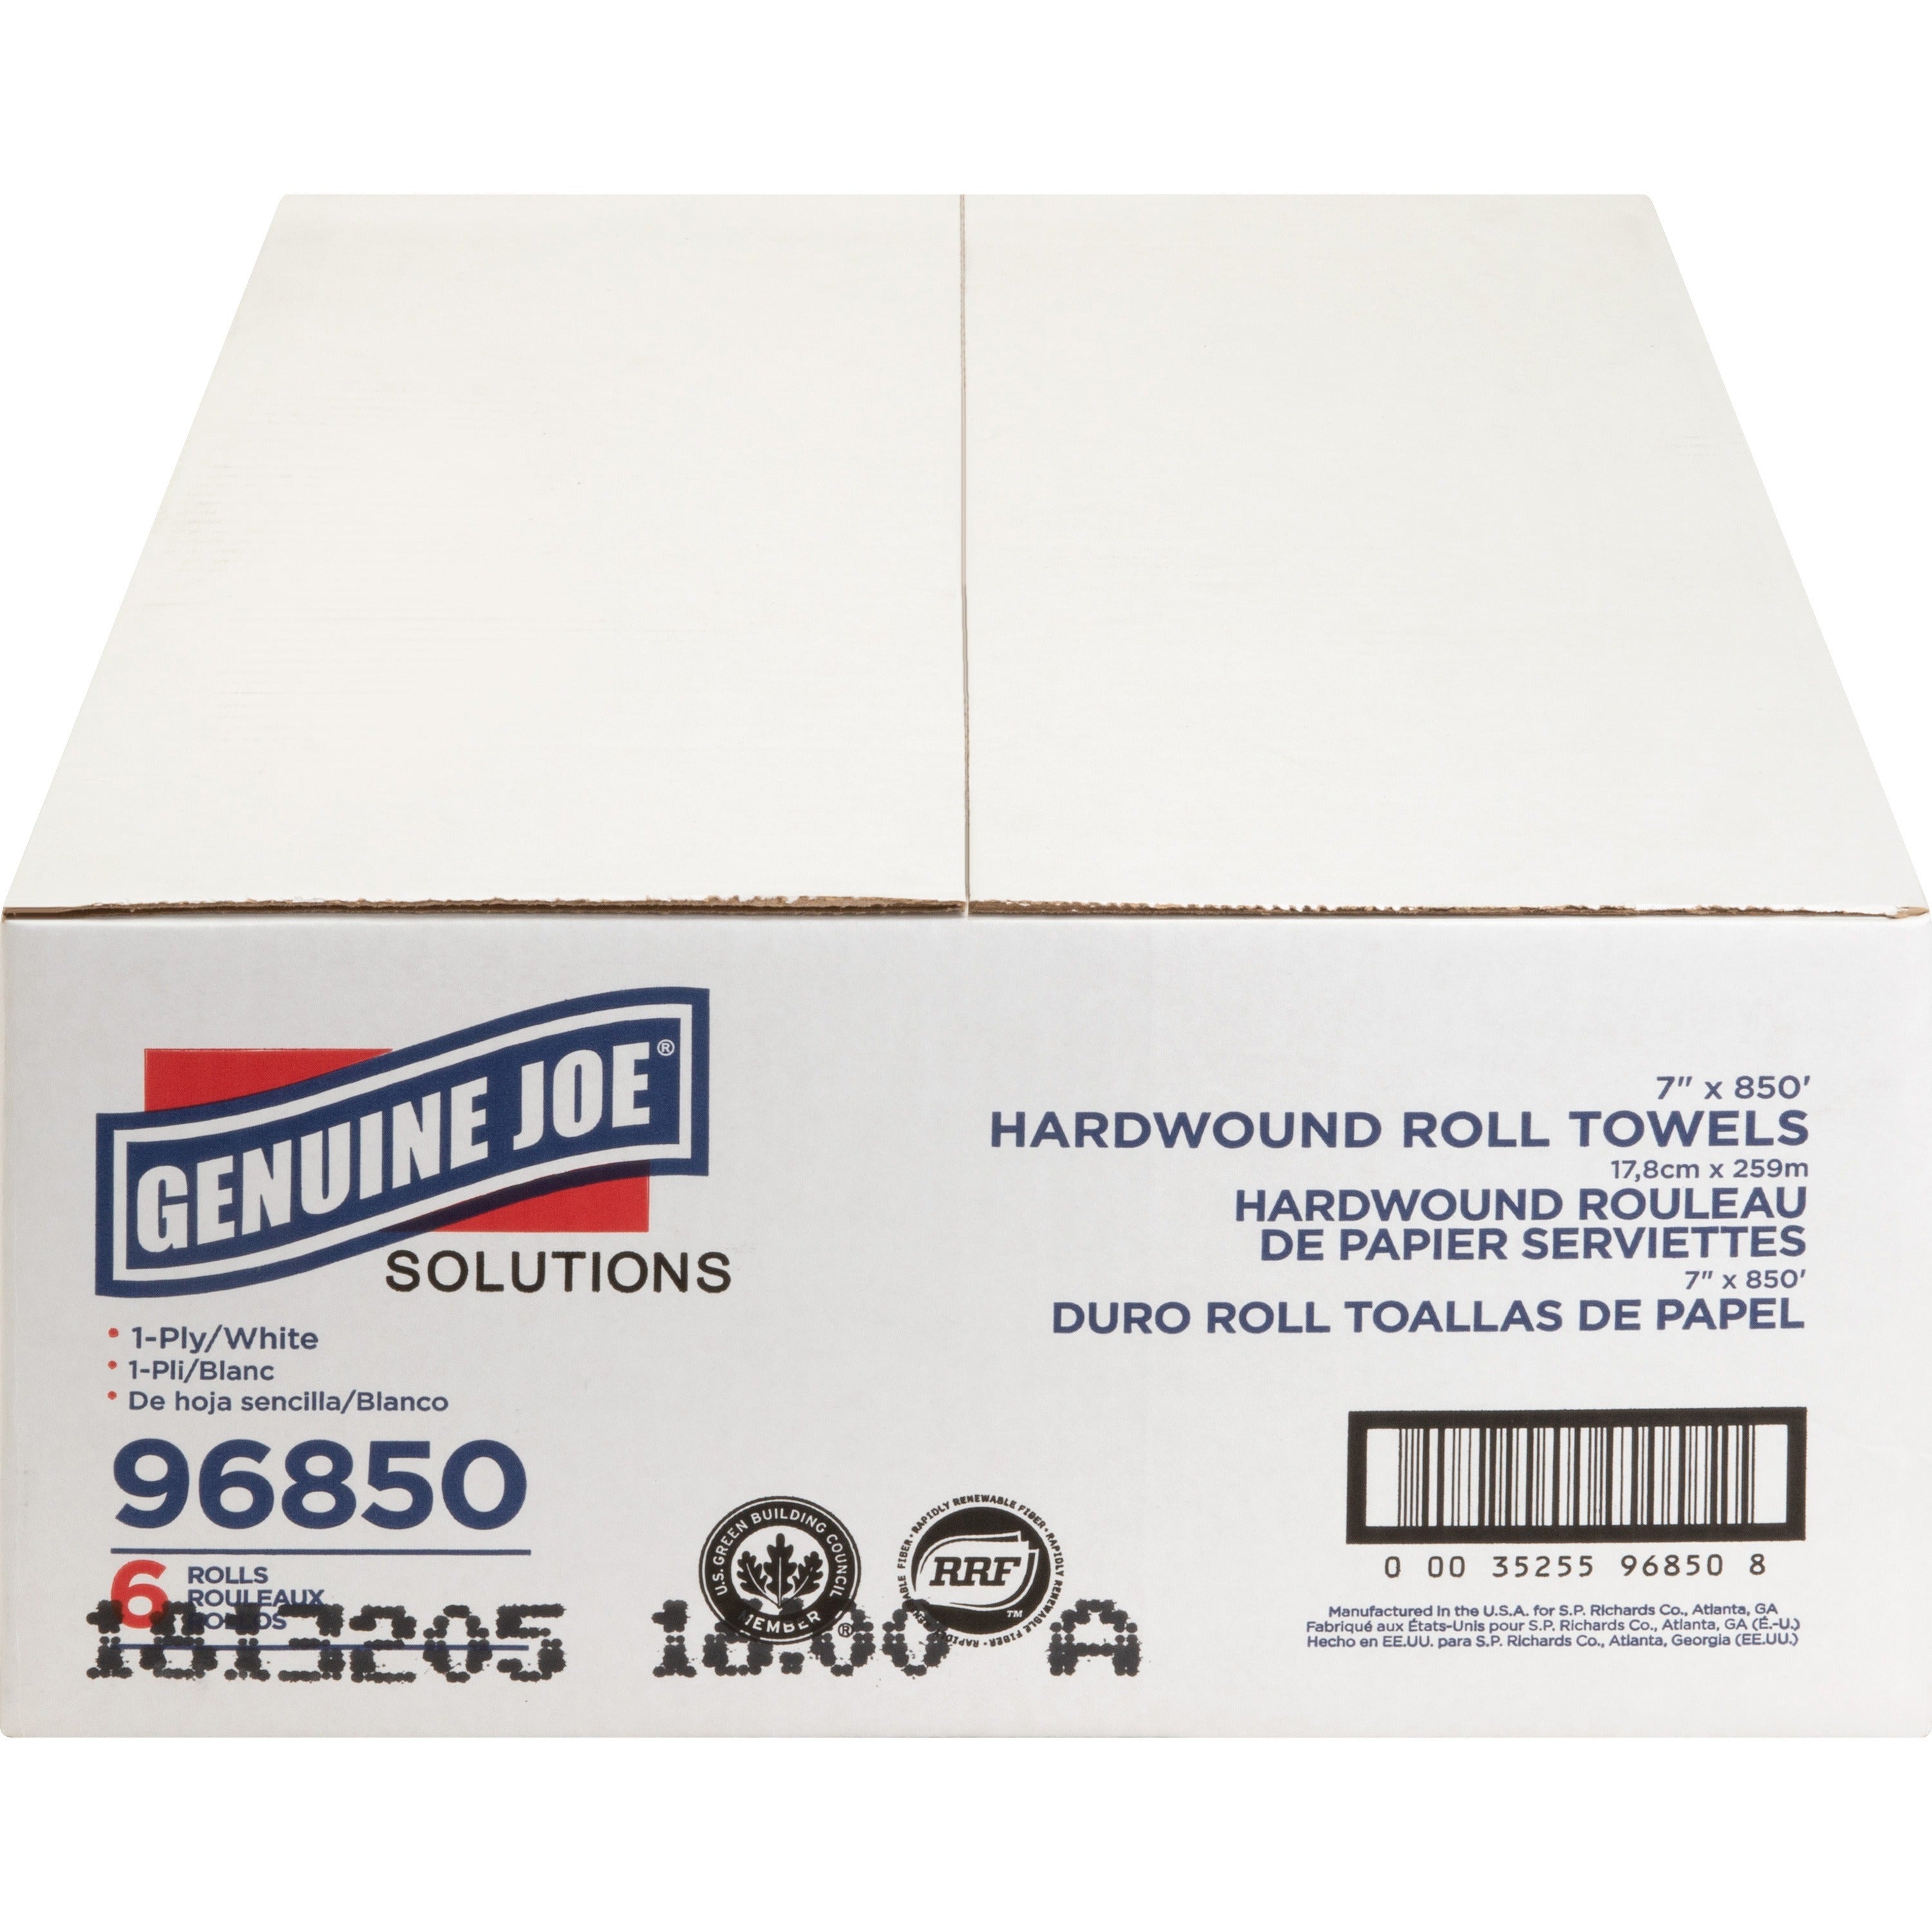 Genuine Joe Solutions Hardwound Paper Towels - 1 Ply - 7" x 850 ft - White - Embossed, Absorbent - 390 / Pallet - 3